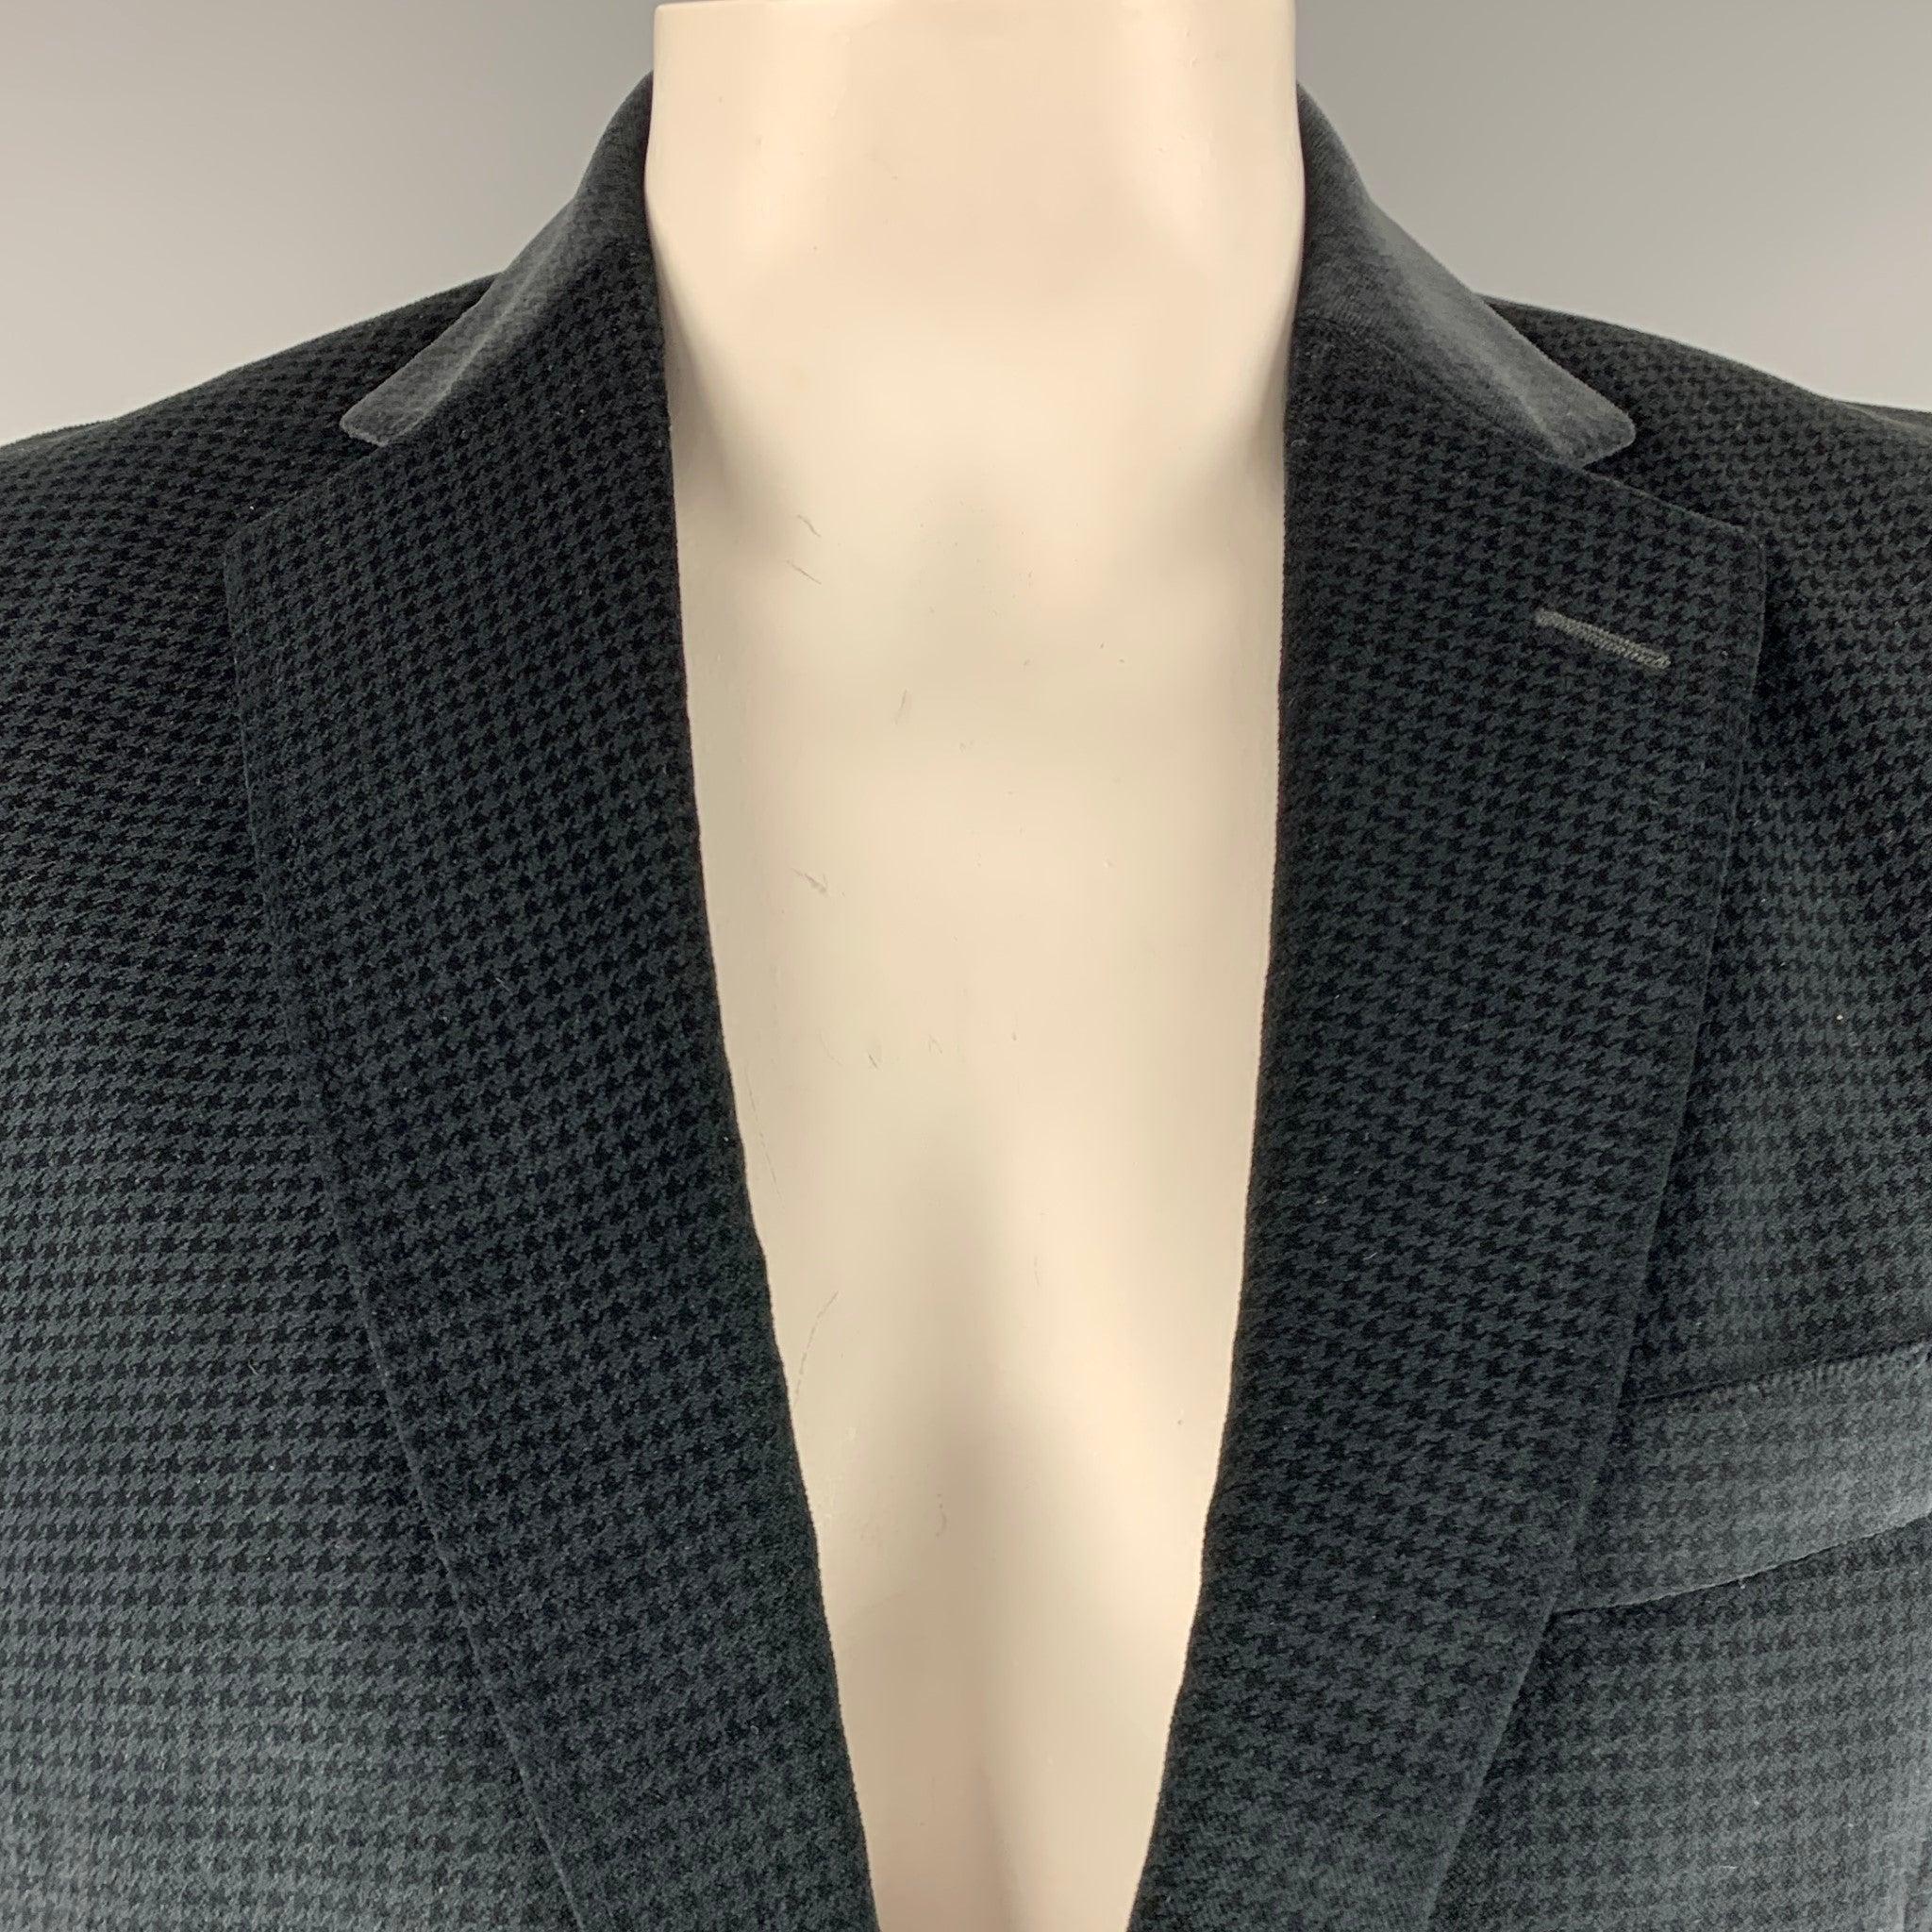 ERMENEGILDO ZEGNA sport coat
in a black cotton silk blend fabric featuring houndstooth pattern, notch lapel, double vented back, and double button closure. Made in Spainches Very Good Pre-Owned Condition. Minor mark on back. 

Marked:   54R